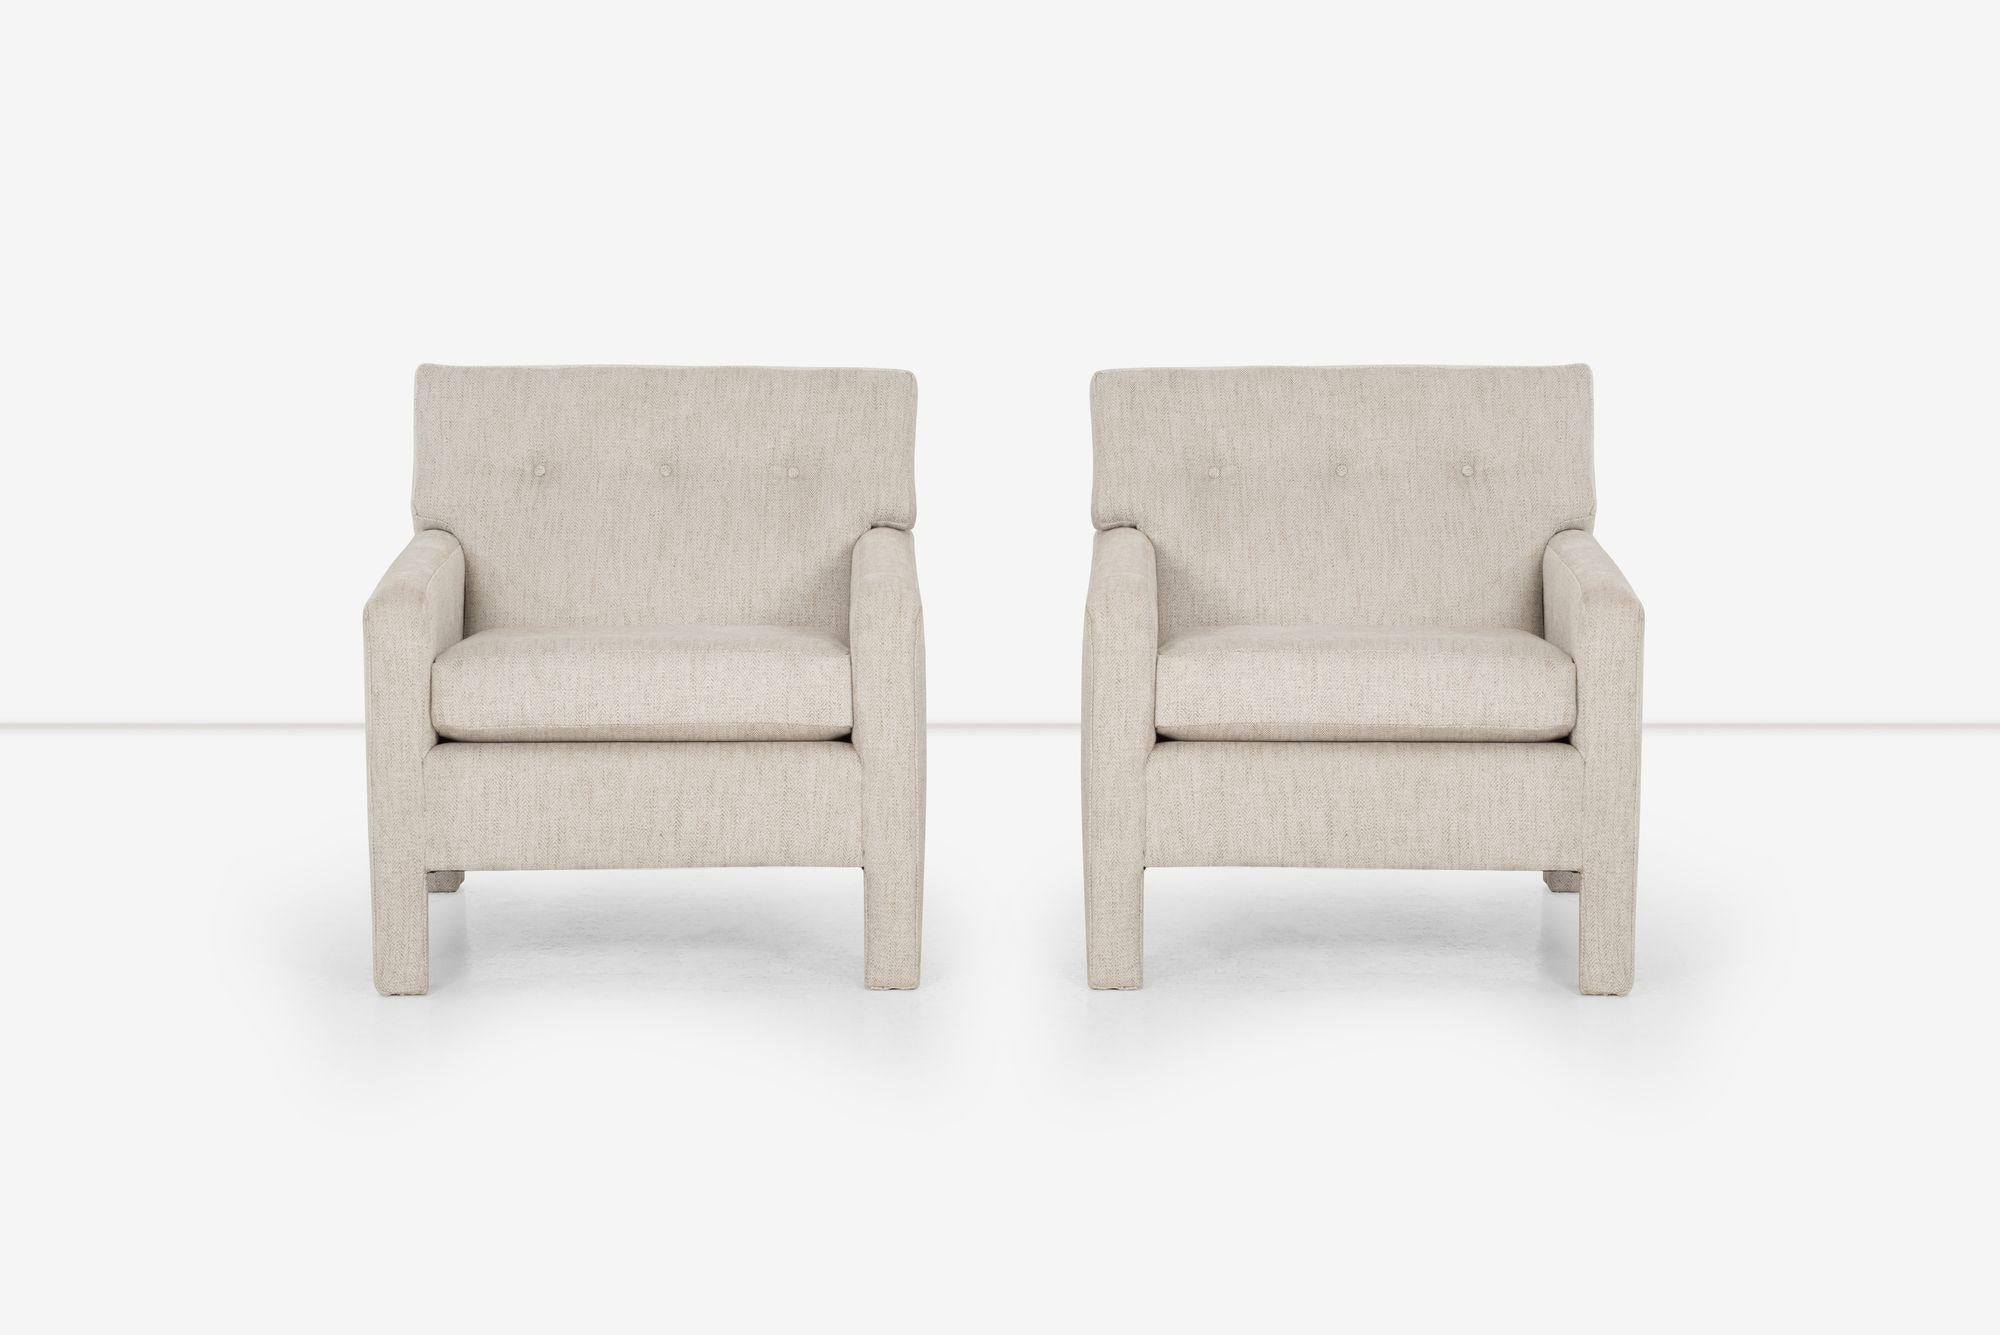 American Pair of Milo Baughman Style Lounge Chairs For Sale